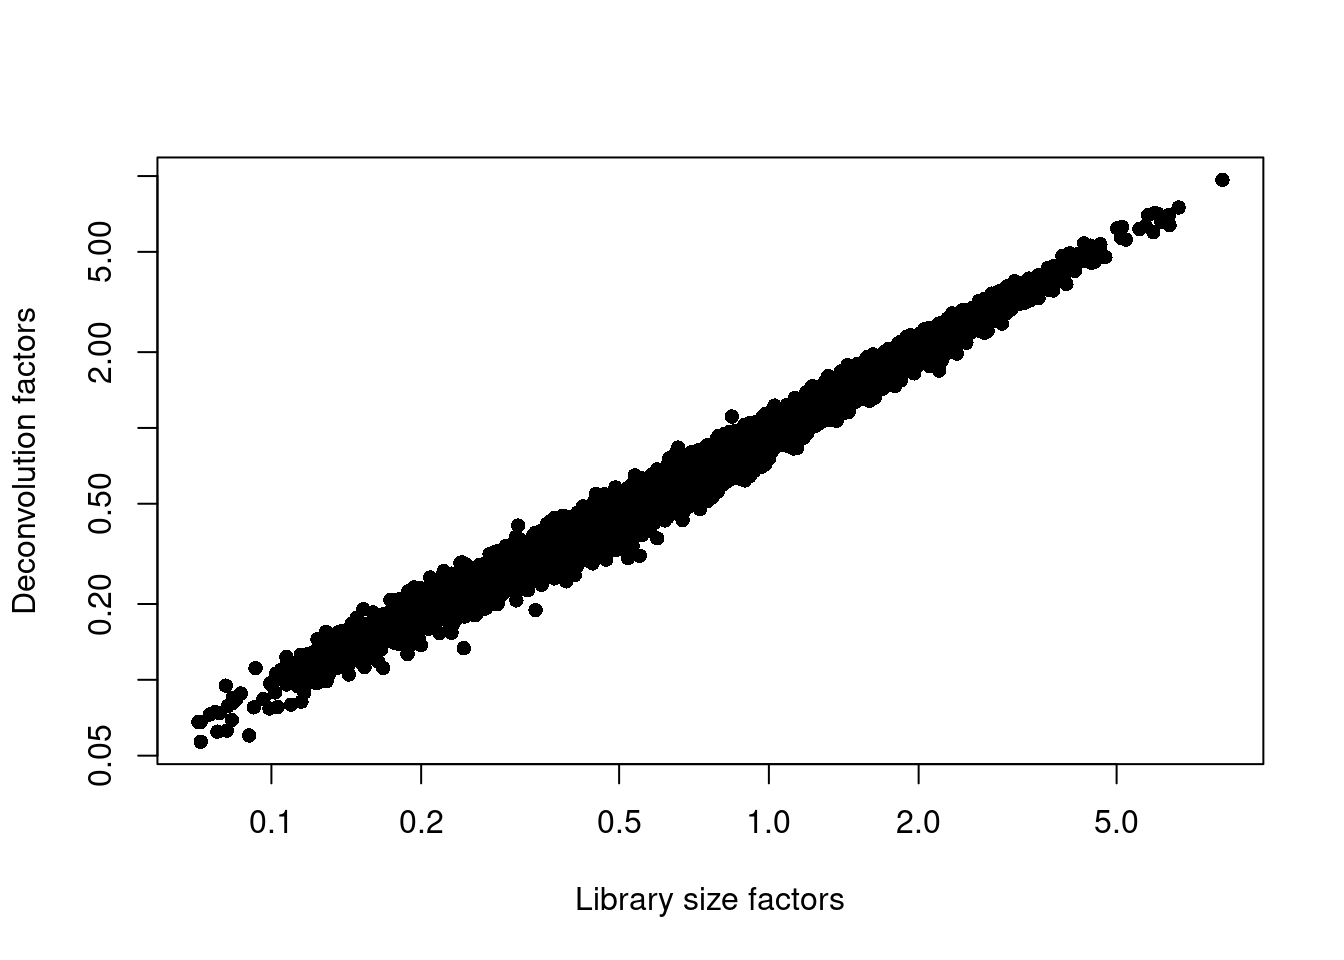 Relationship between the library size factors and the deconvolution size factors in the Paul HSC dataset.